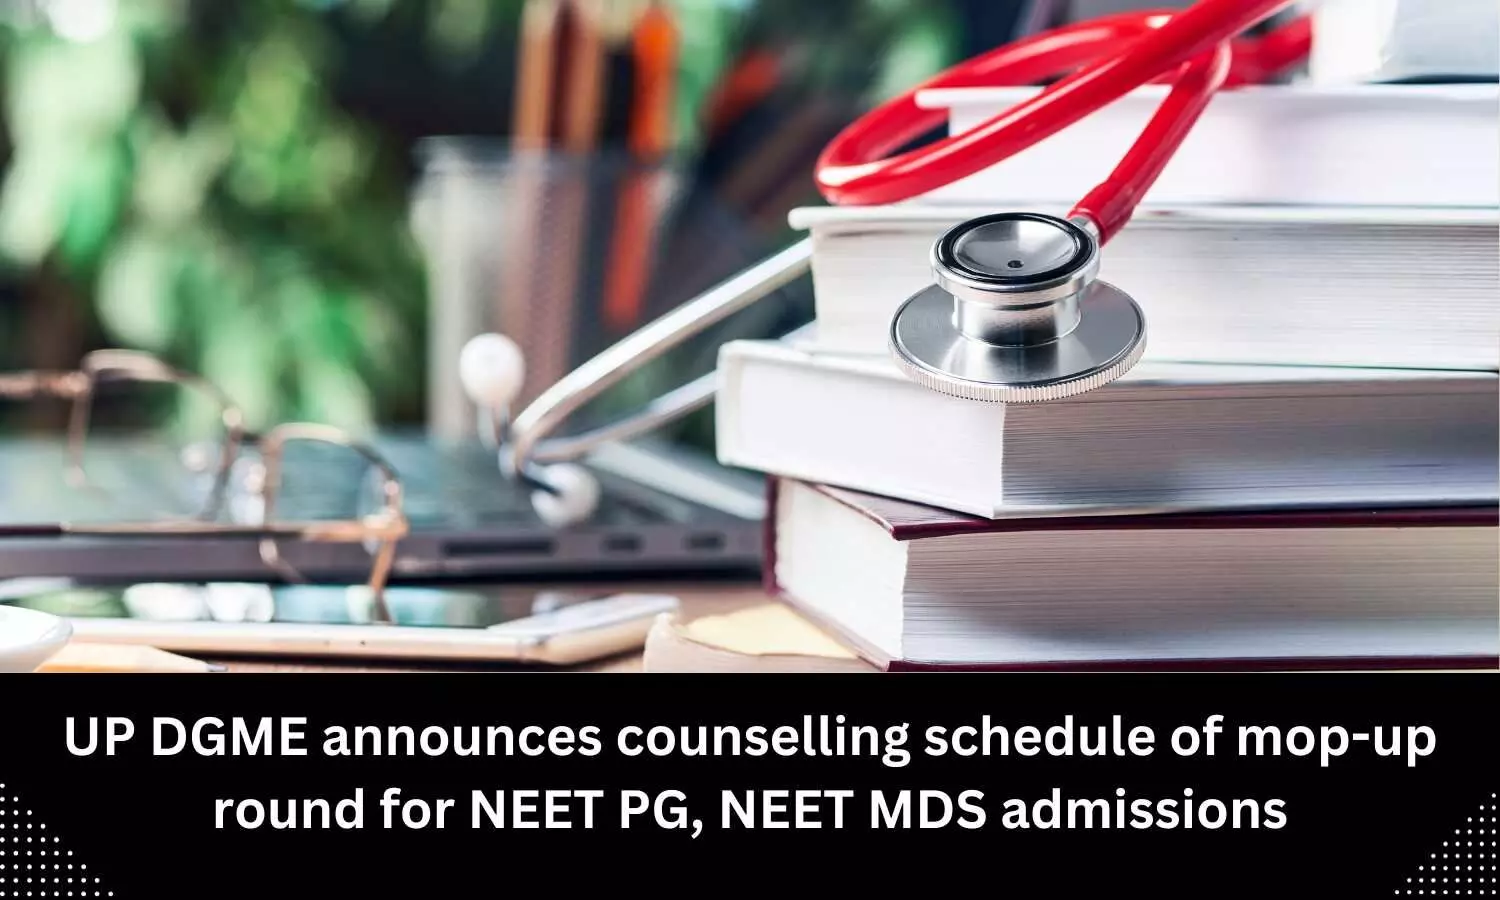 UP DGME announces conduction of the mop-up round for NEET PG, NEET MDS courses